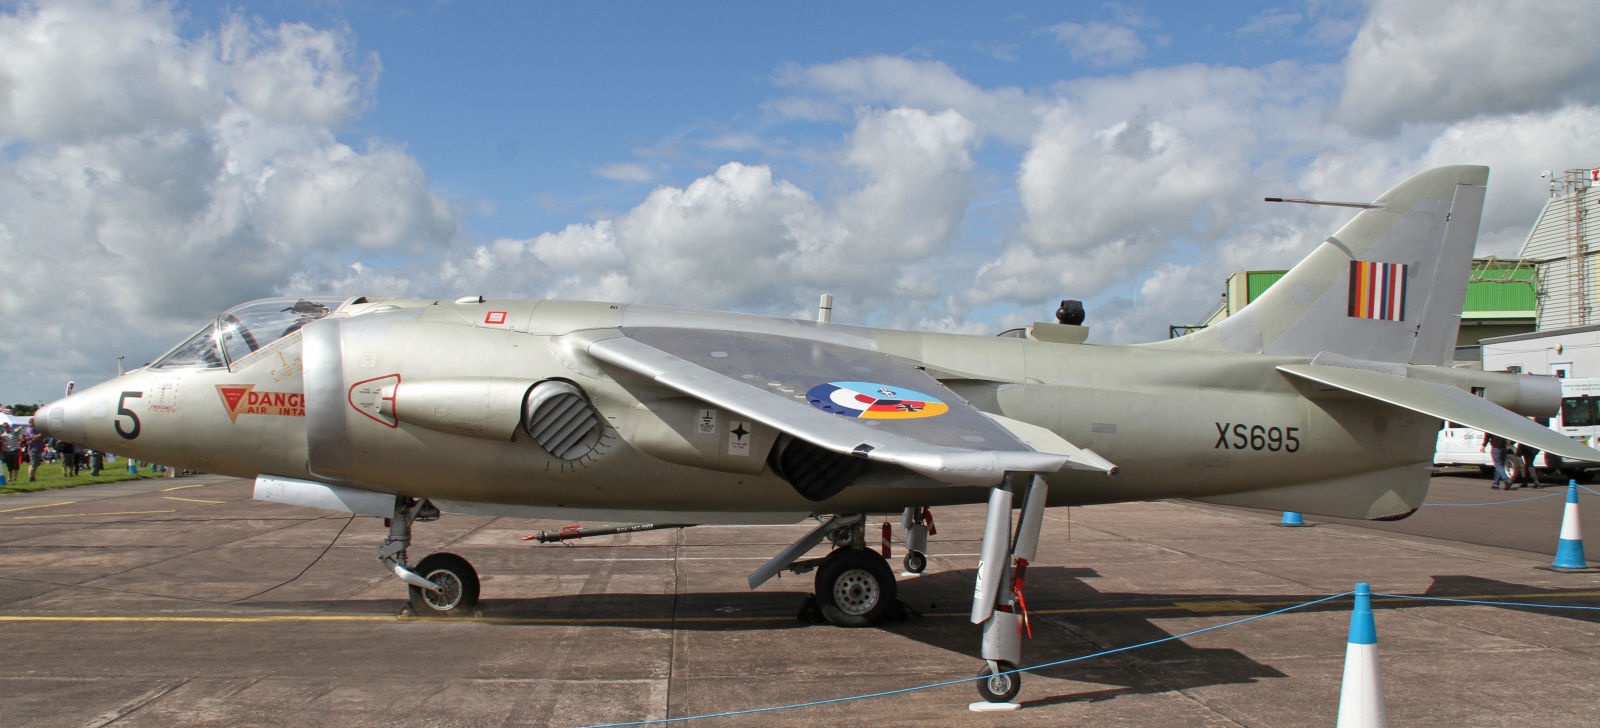 Hawker Kestrel II at the Cosford Air Show in 2014